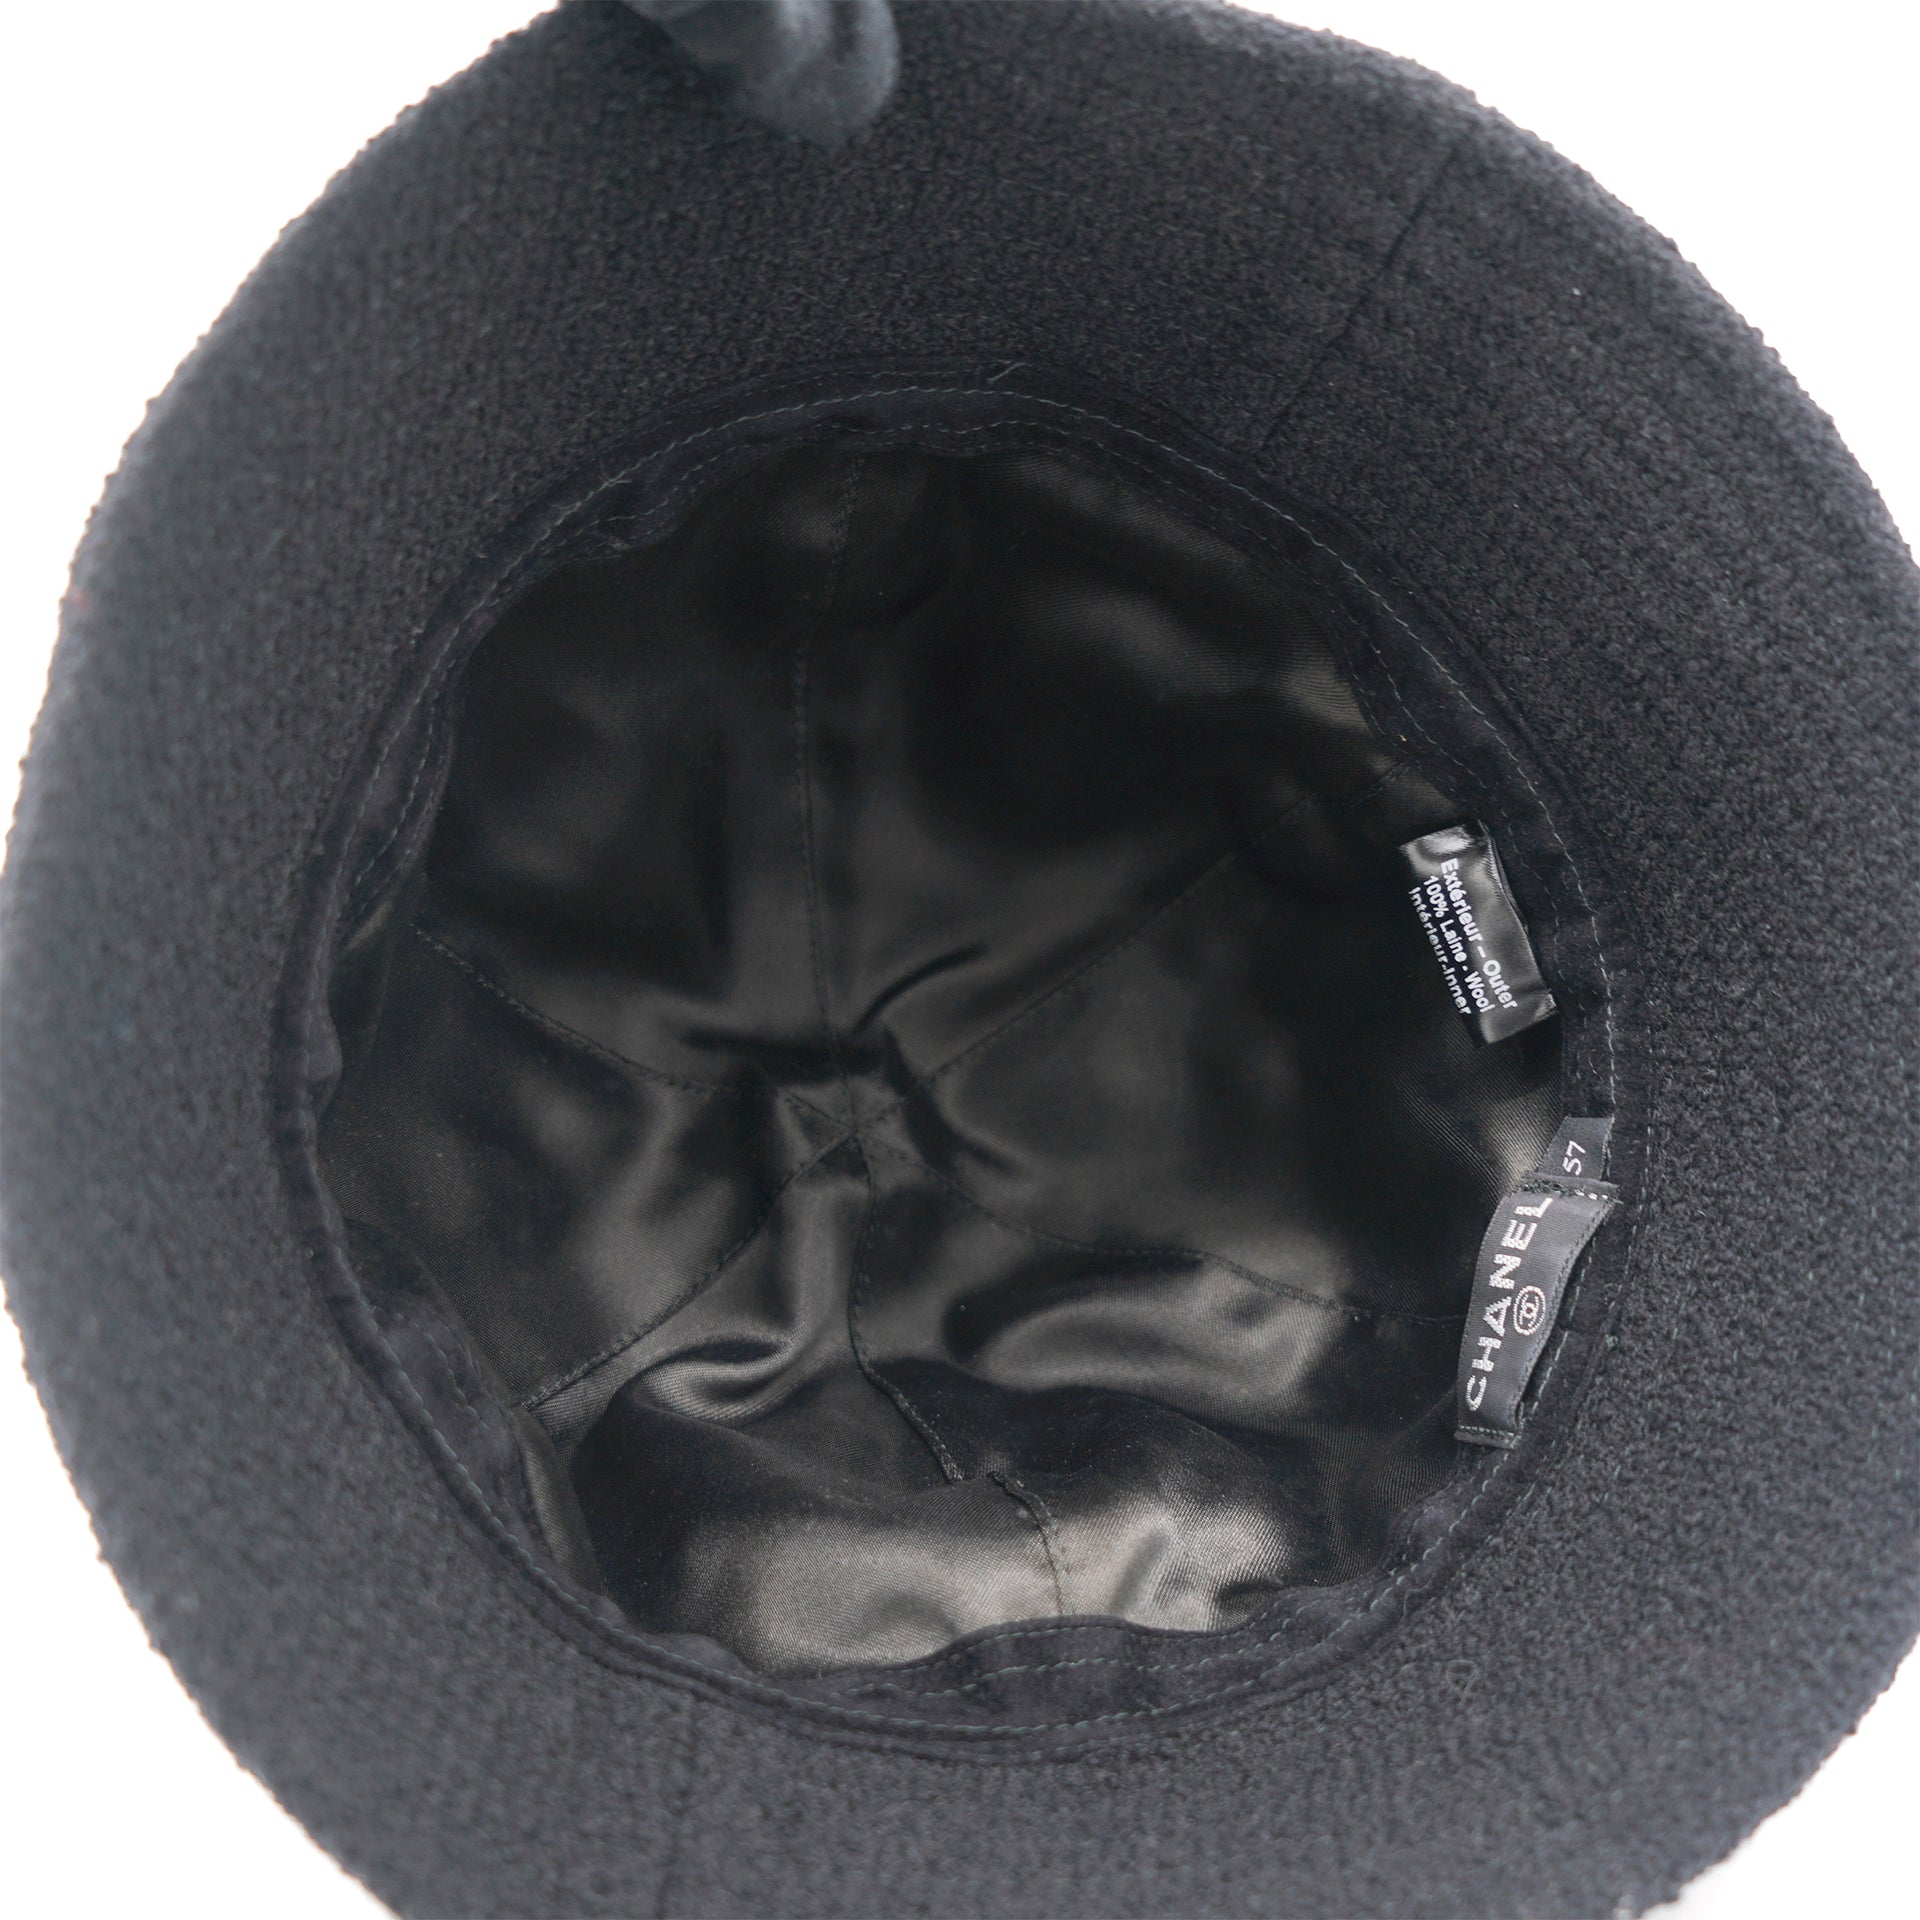 Black Fabric Bucket Hat with Bow 57